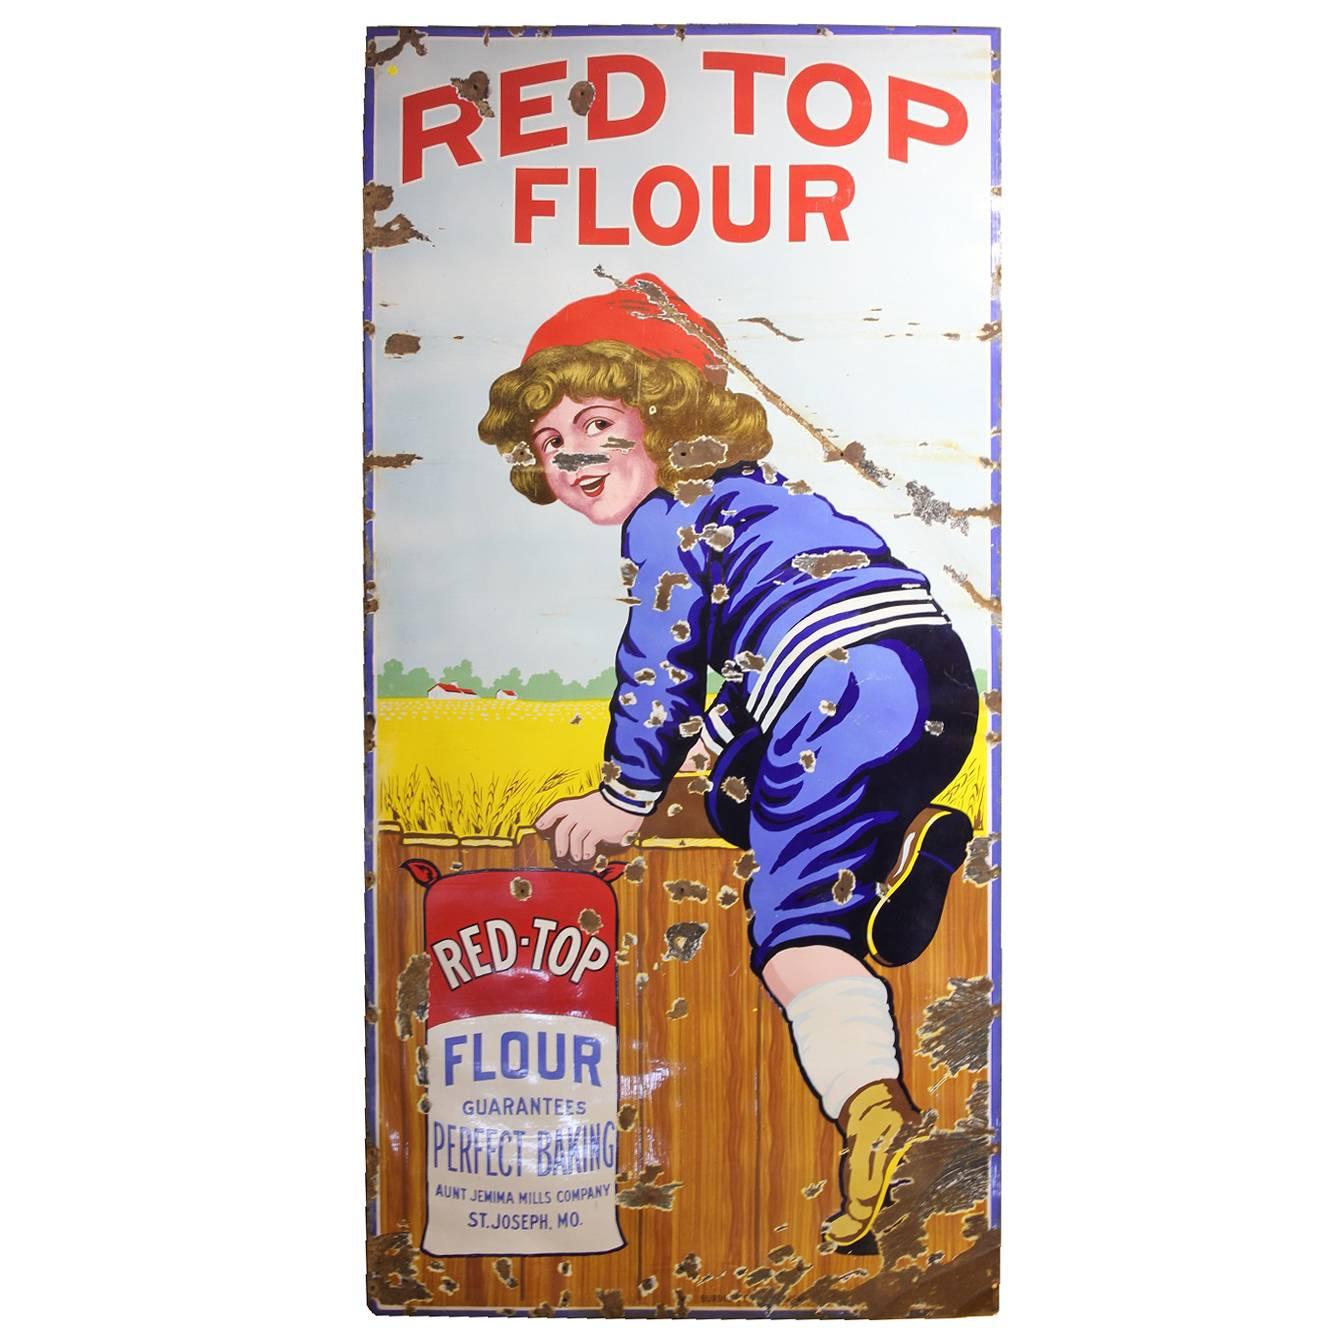 Tall Rare Antique Porcelain Advertising Sign for "Red Top Flour' For Sale